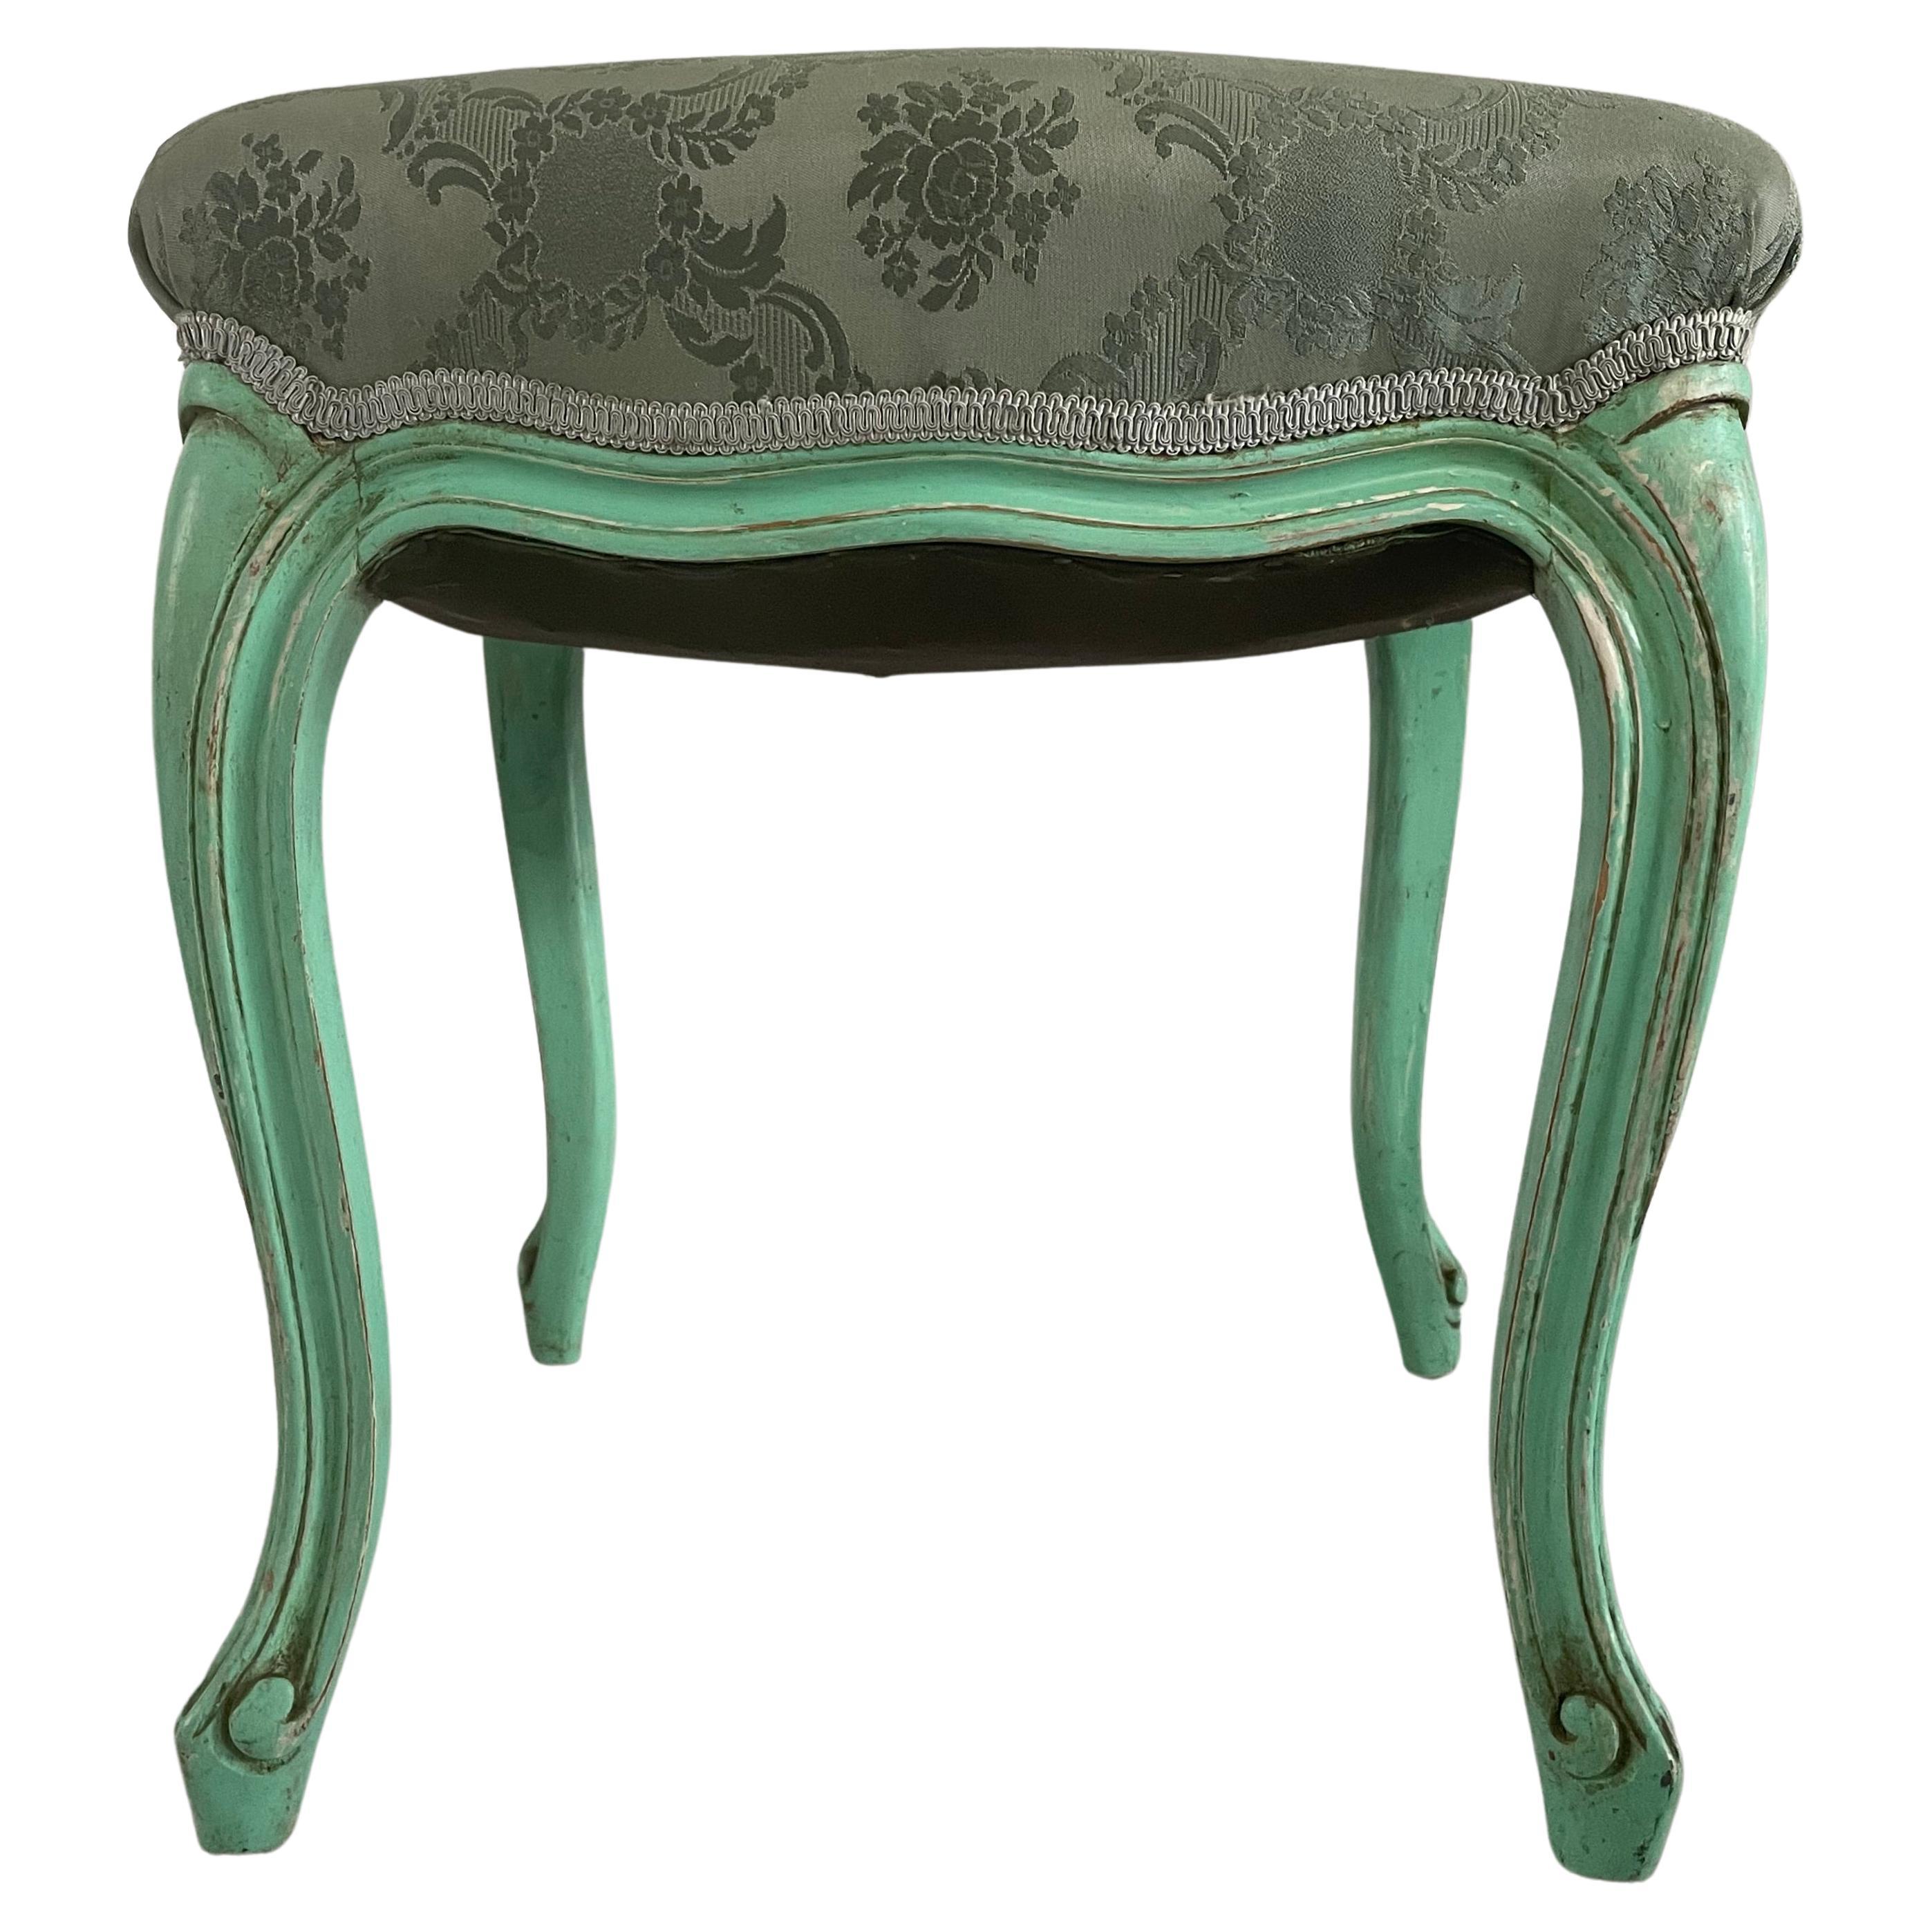 French Louis XV-Style Stool with Cabriole Legs and Hoof Feet